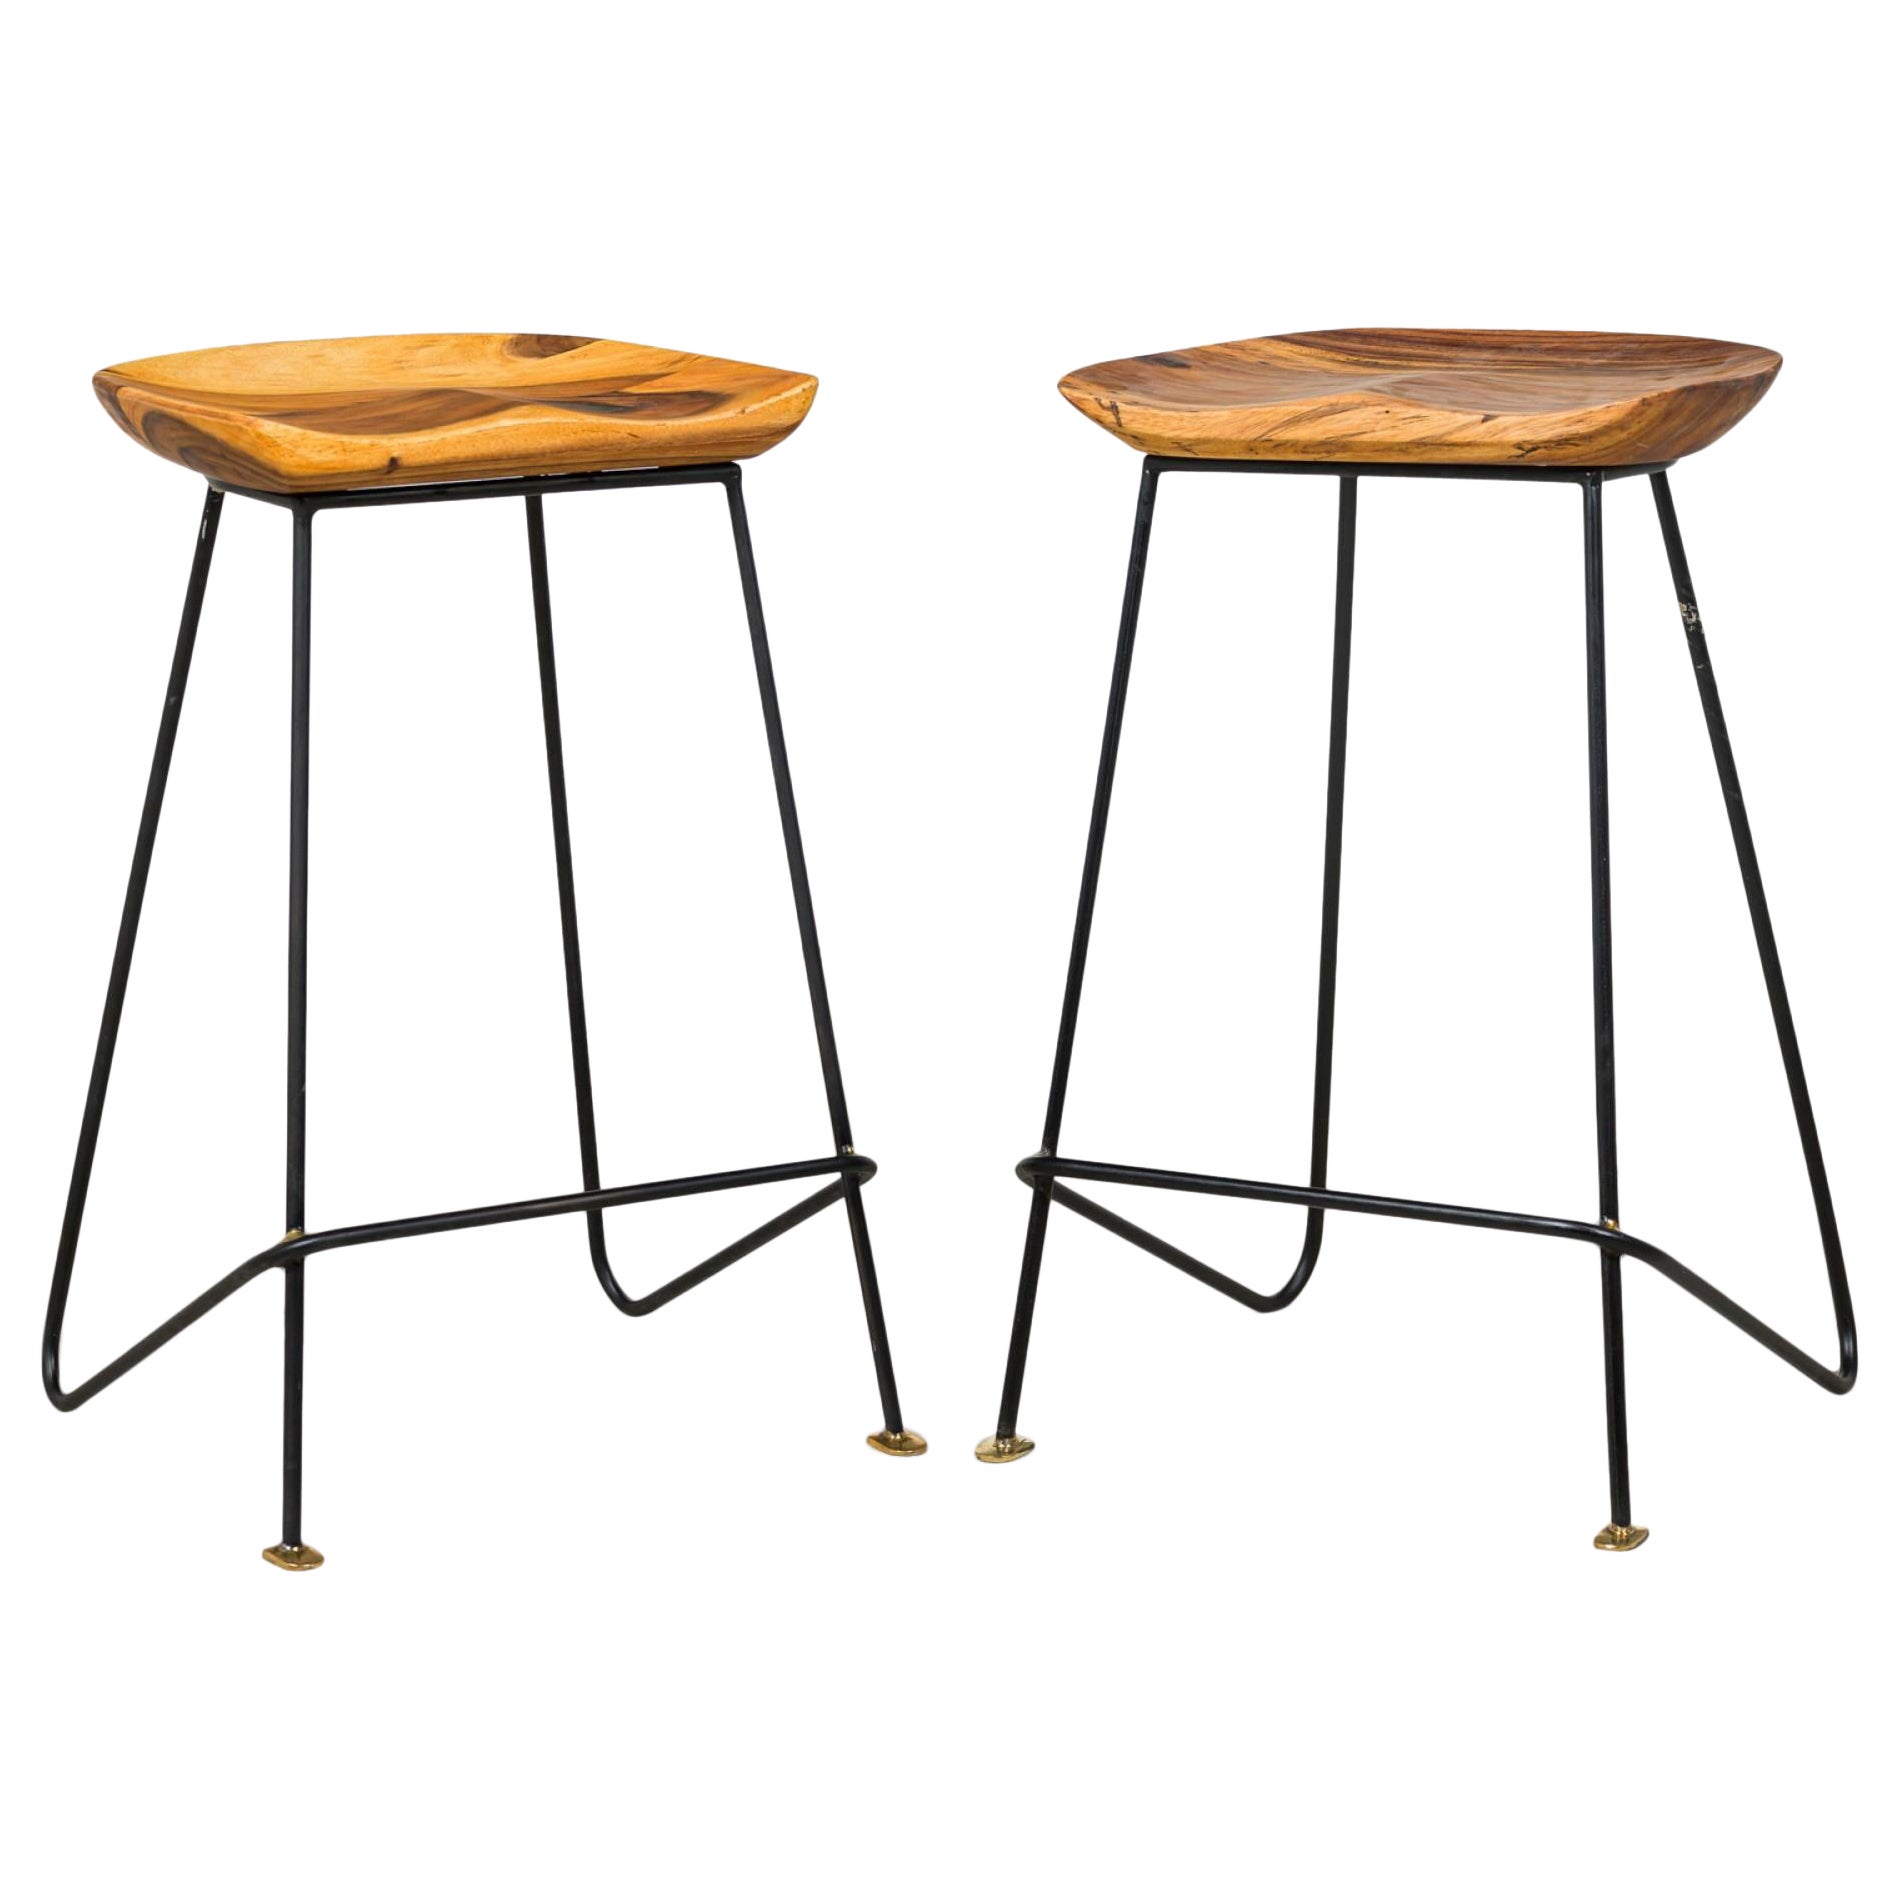 "Braga" Contemporary / Modern Natural Wood and Bronze Stools For Sale